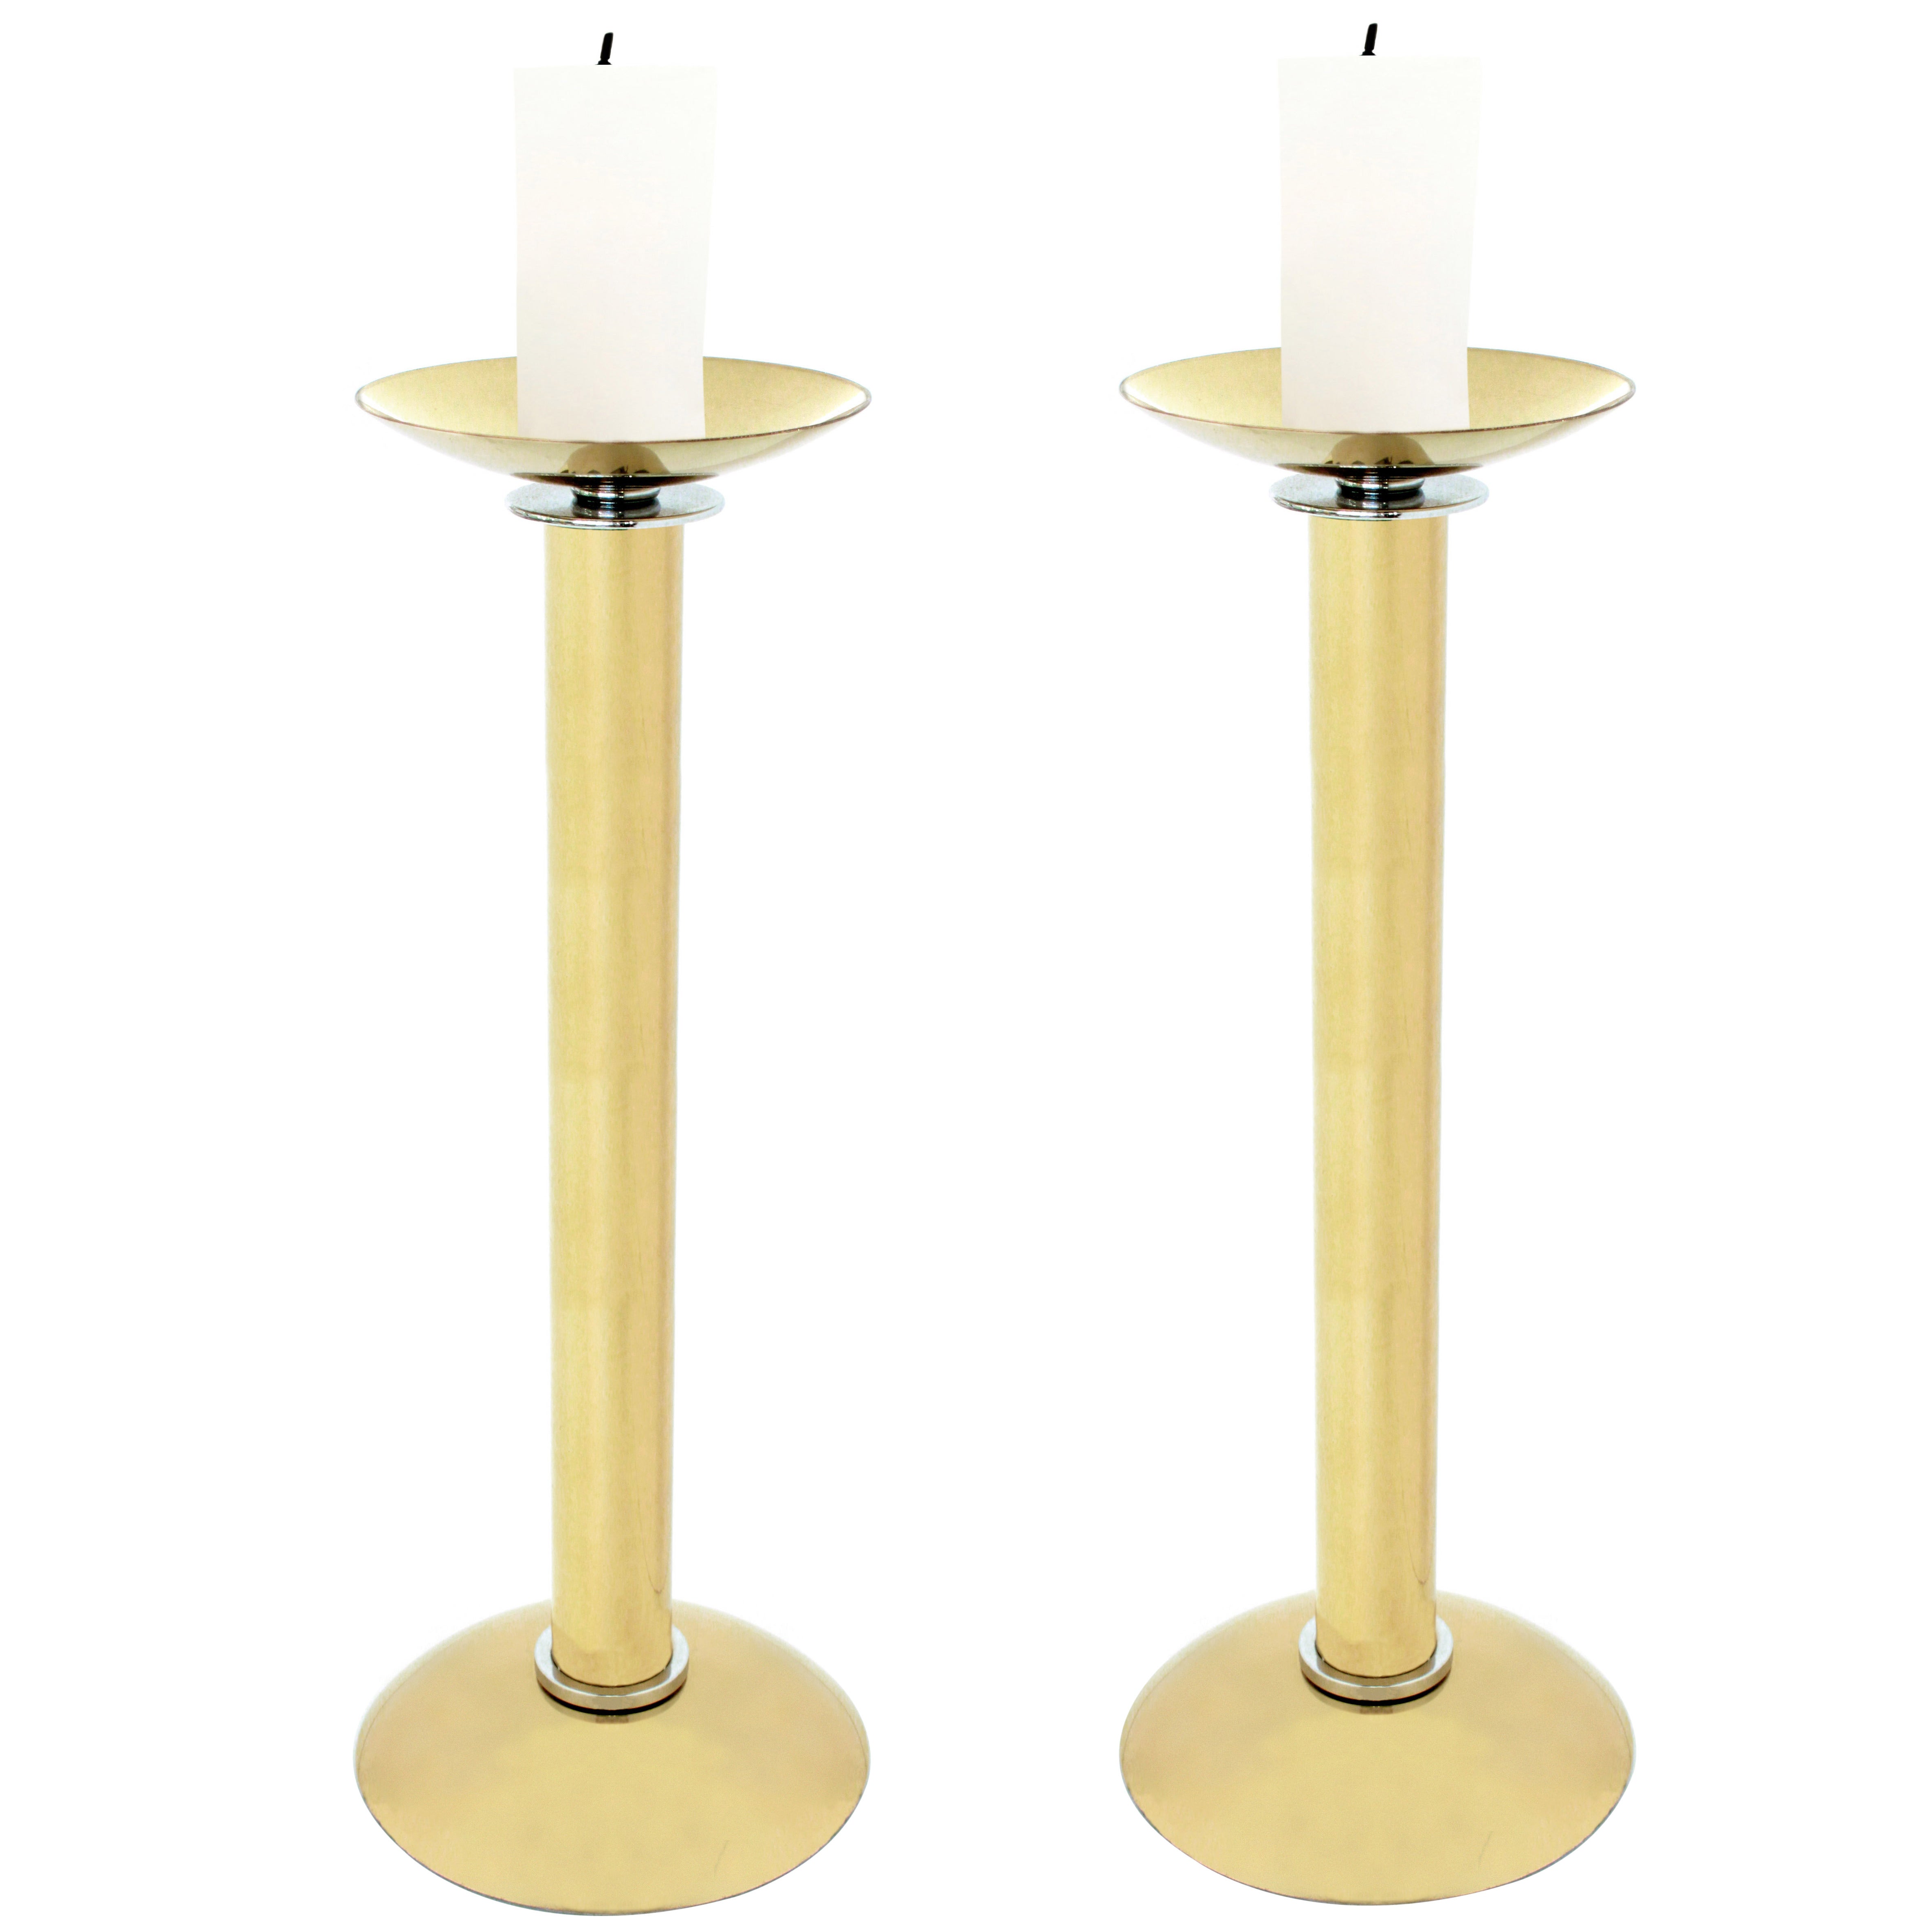 Karl Springer Pair of Candle Holders in Brass 1980s